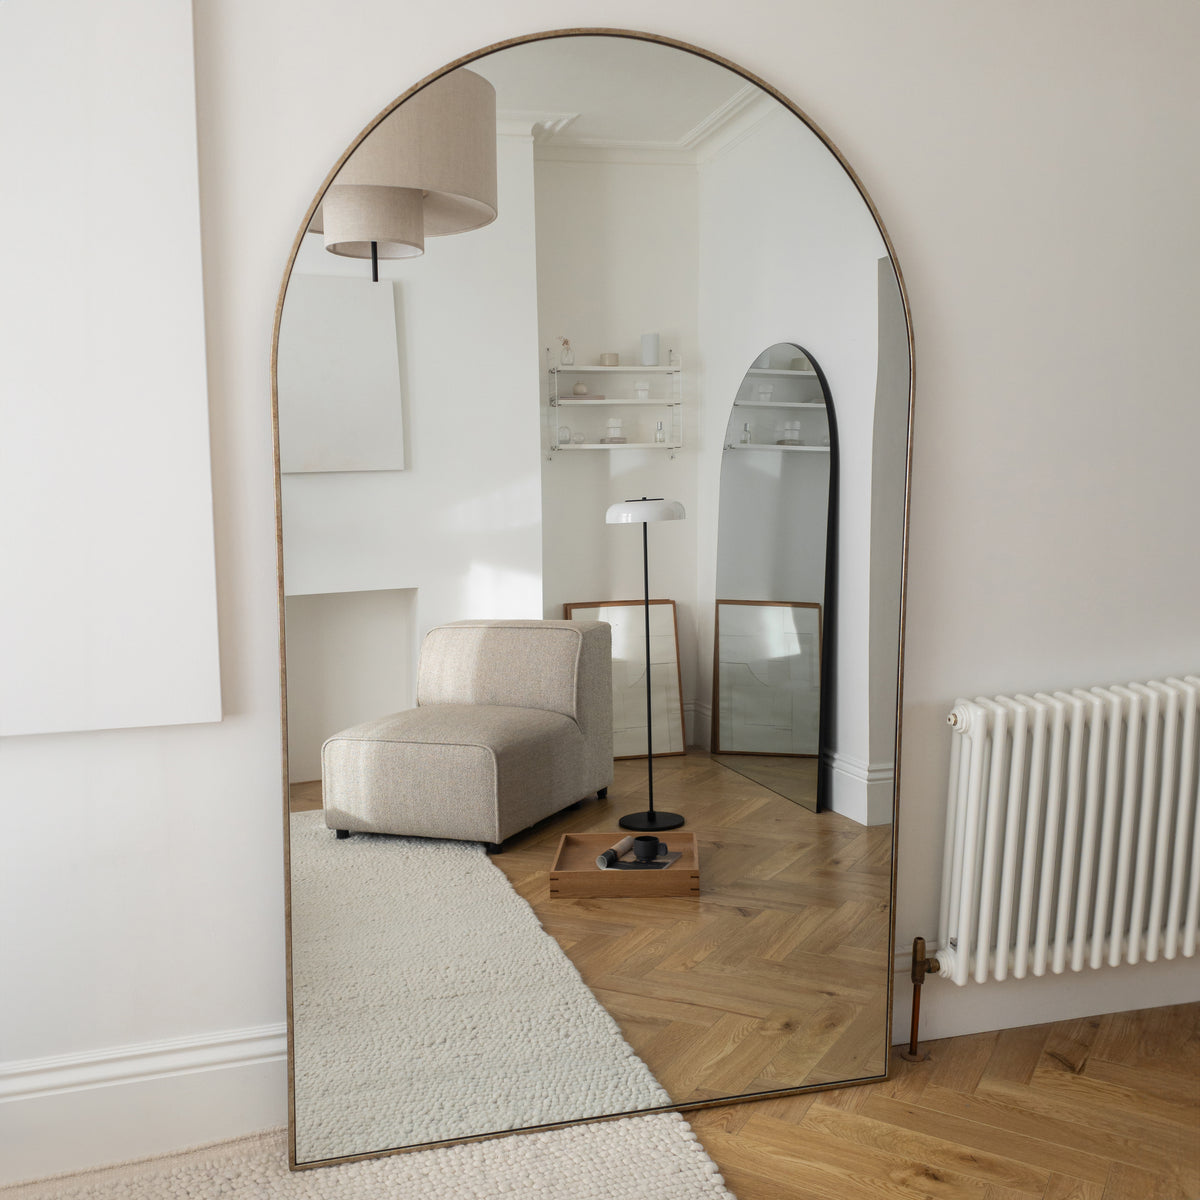 Champagne Full Length Arched Metal Mirror in living room leaning against wall